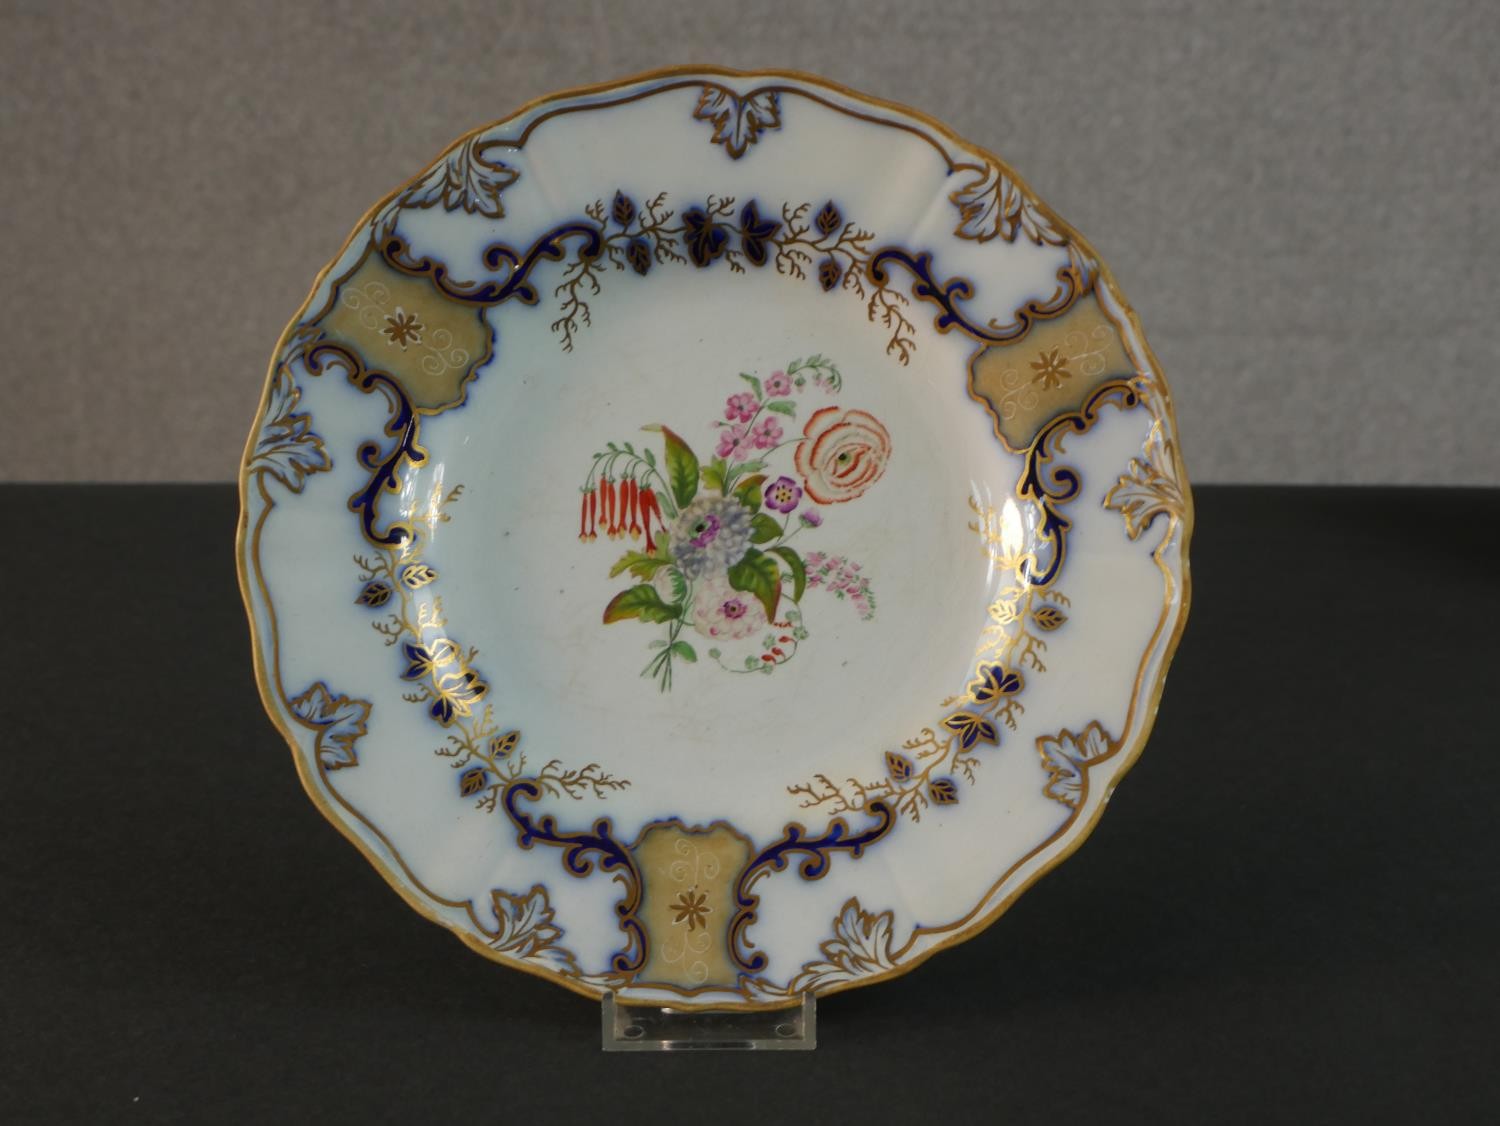 A set of six 19th century Wedwood Pearlware plates, decorated with flowers and gilded detail, - Image 2 of 6